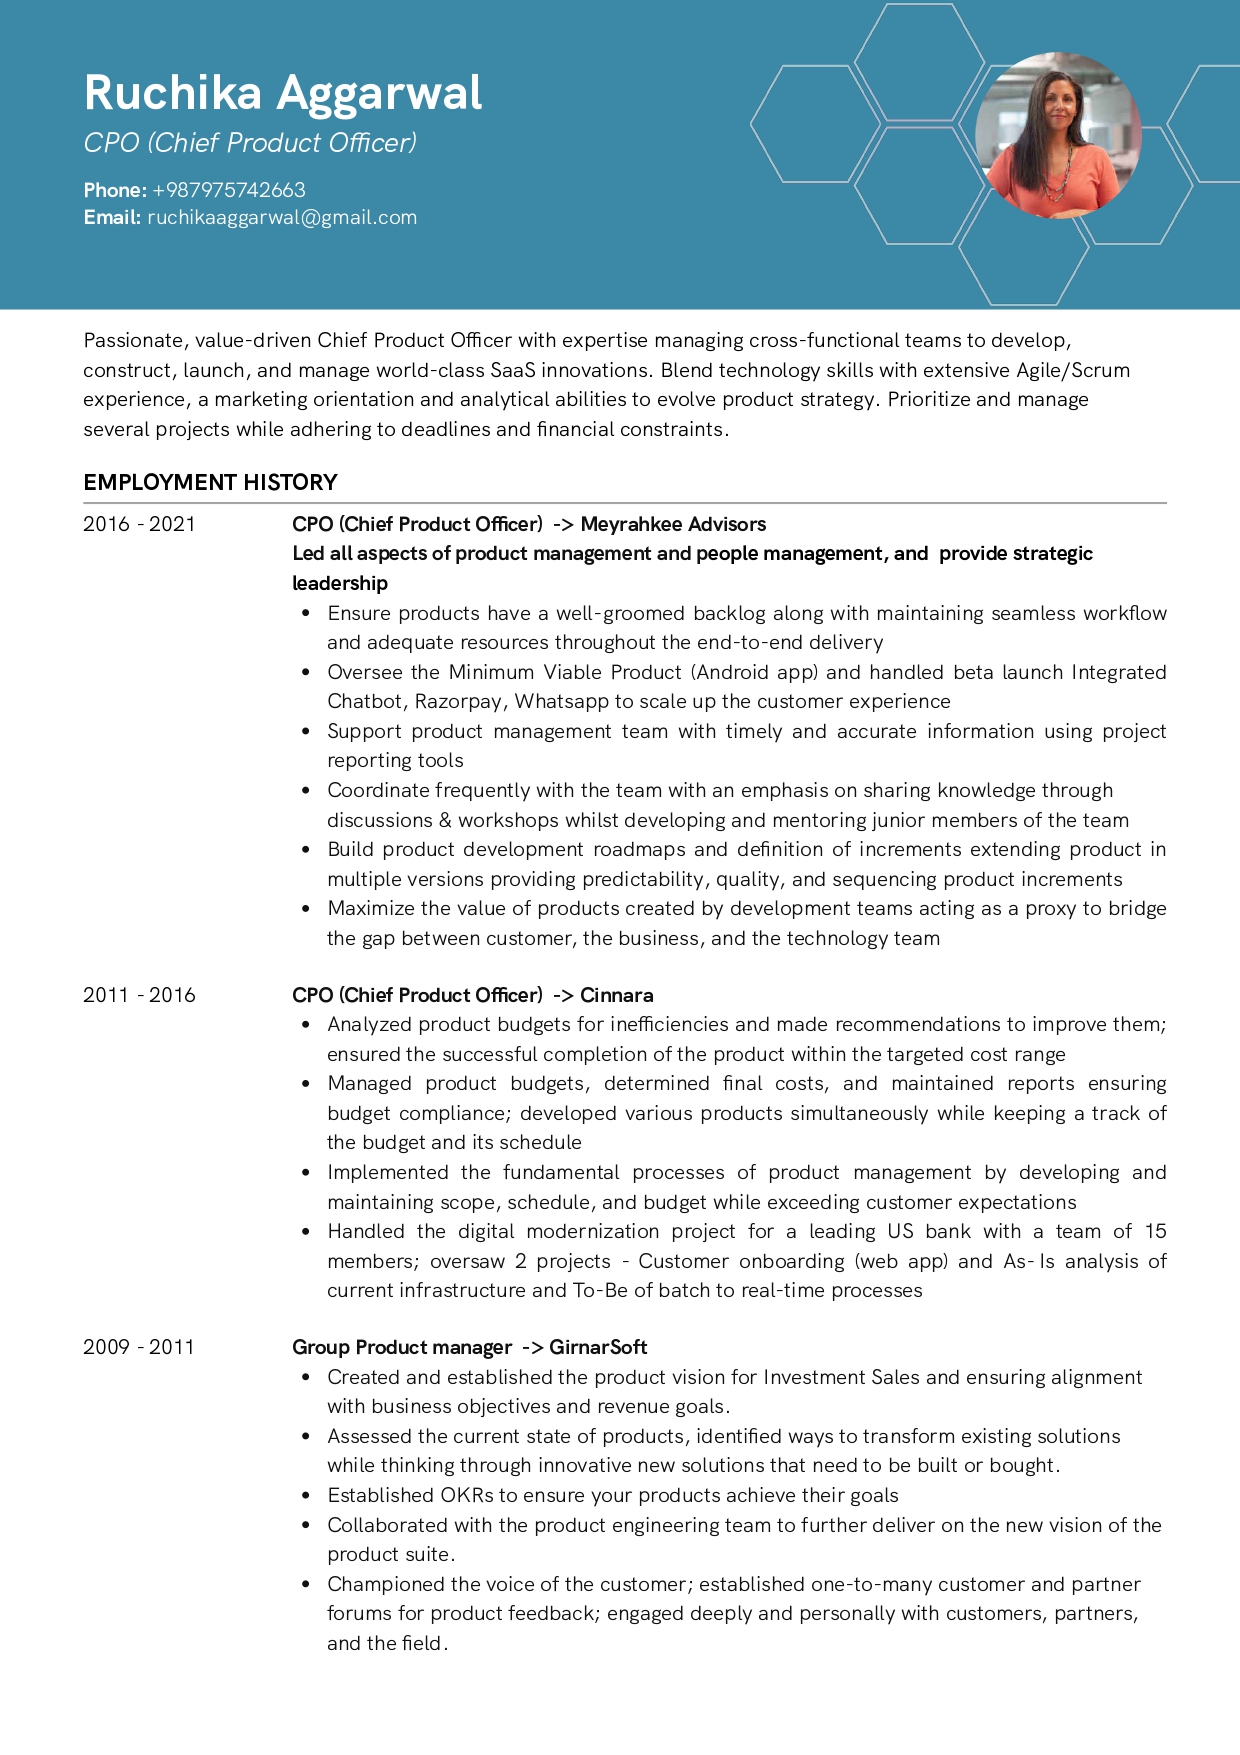 Resume of Chief Product Officer